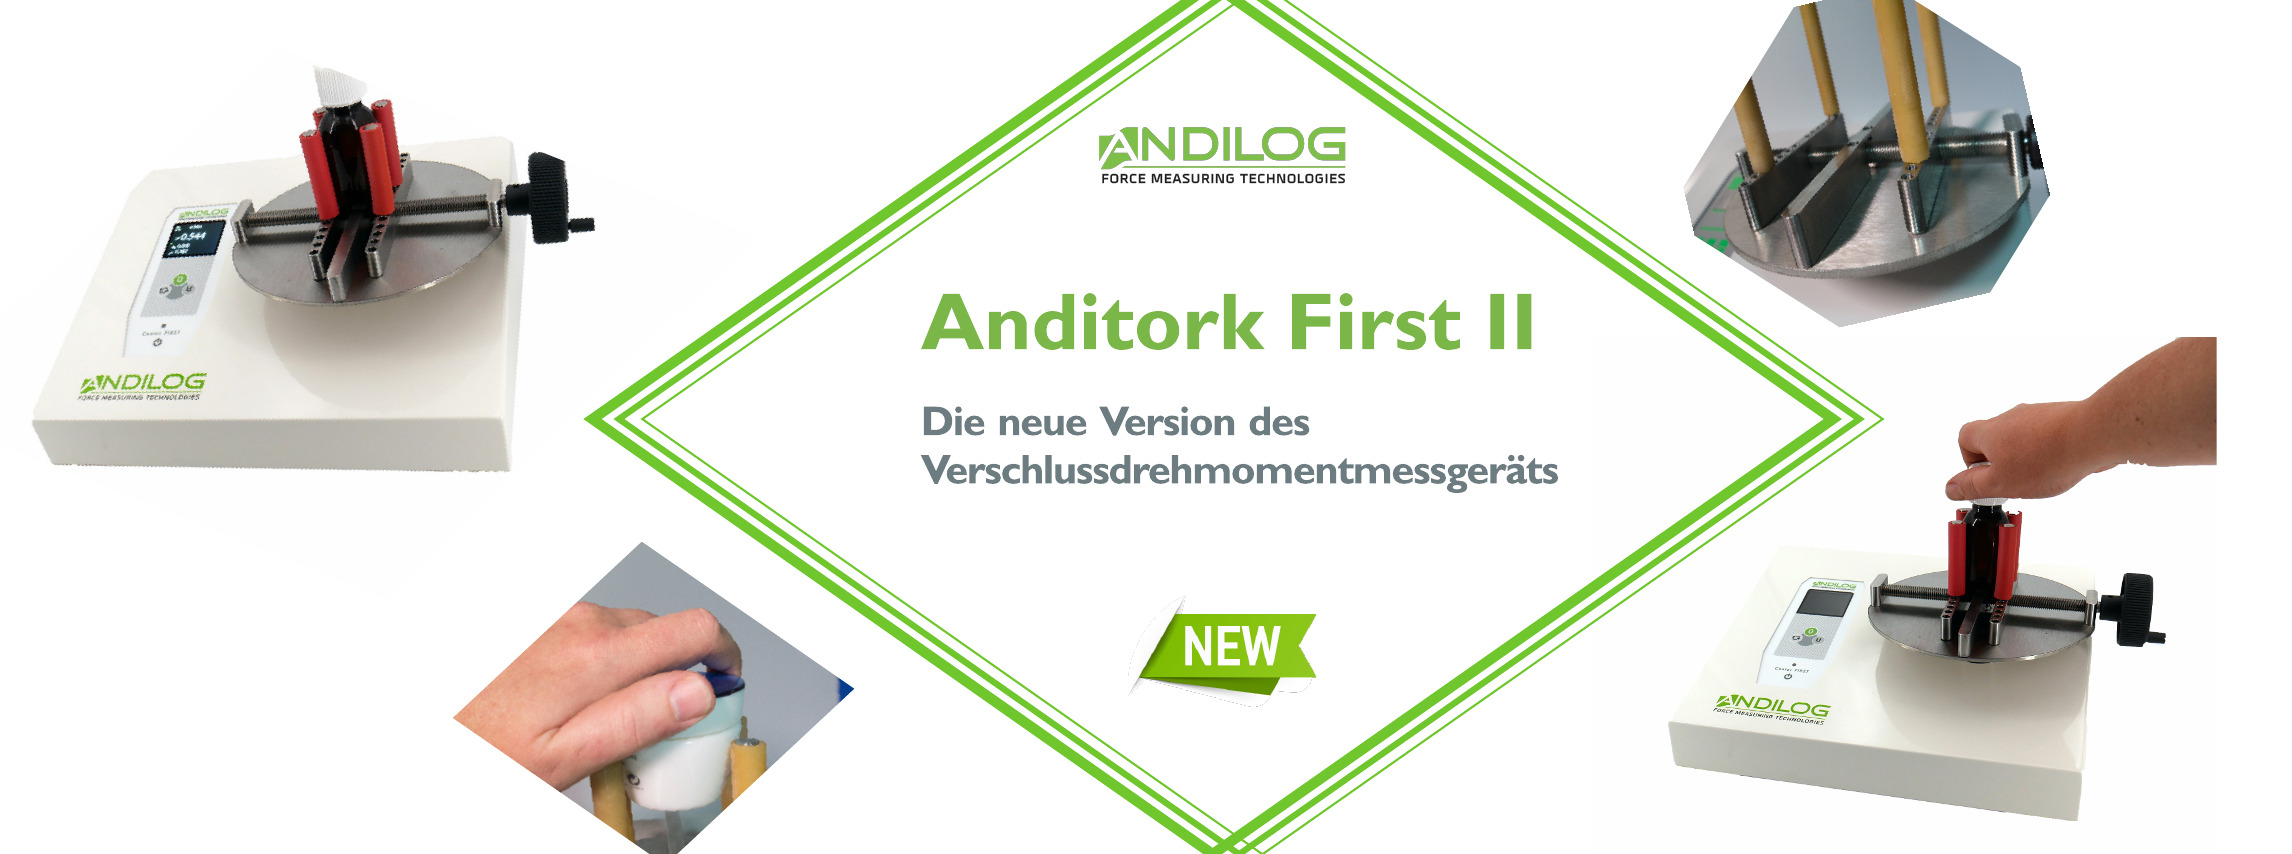 Anditork First II